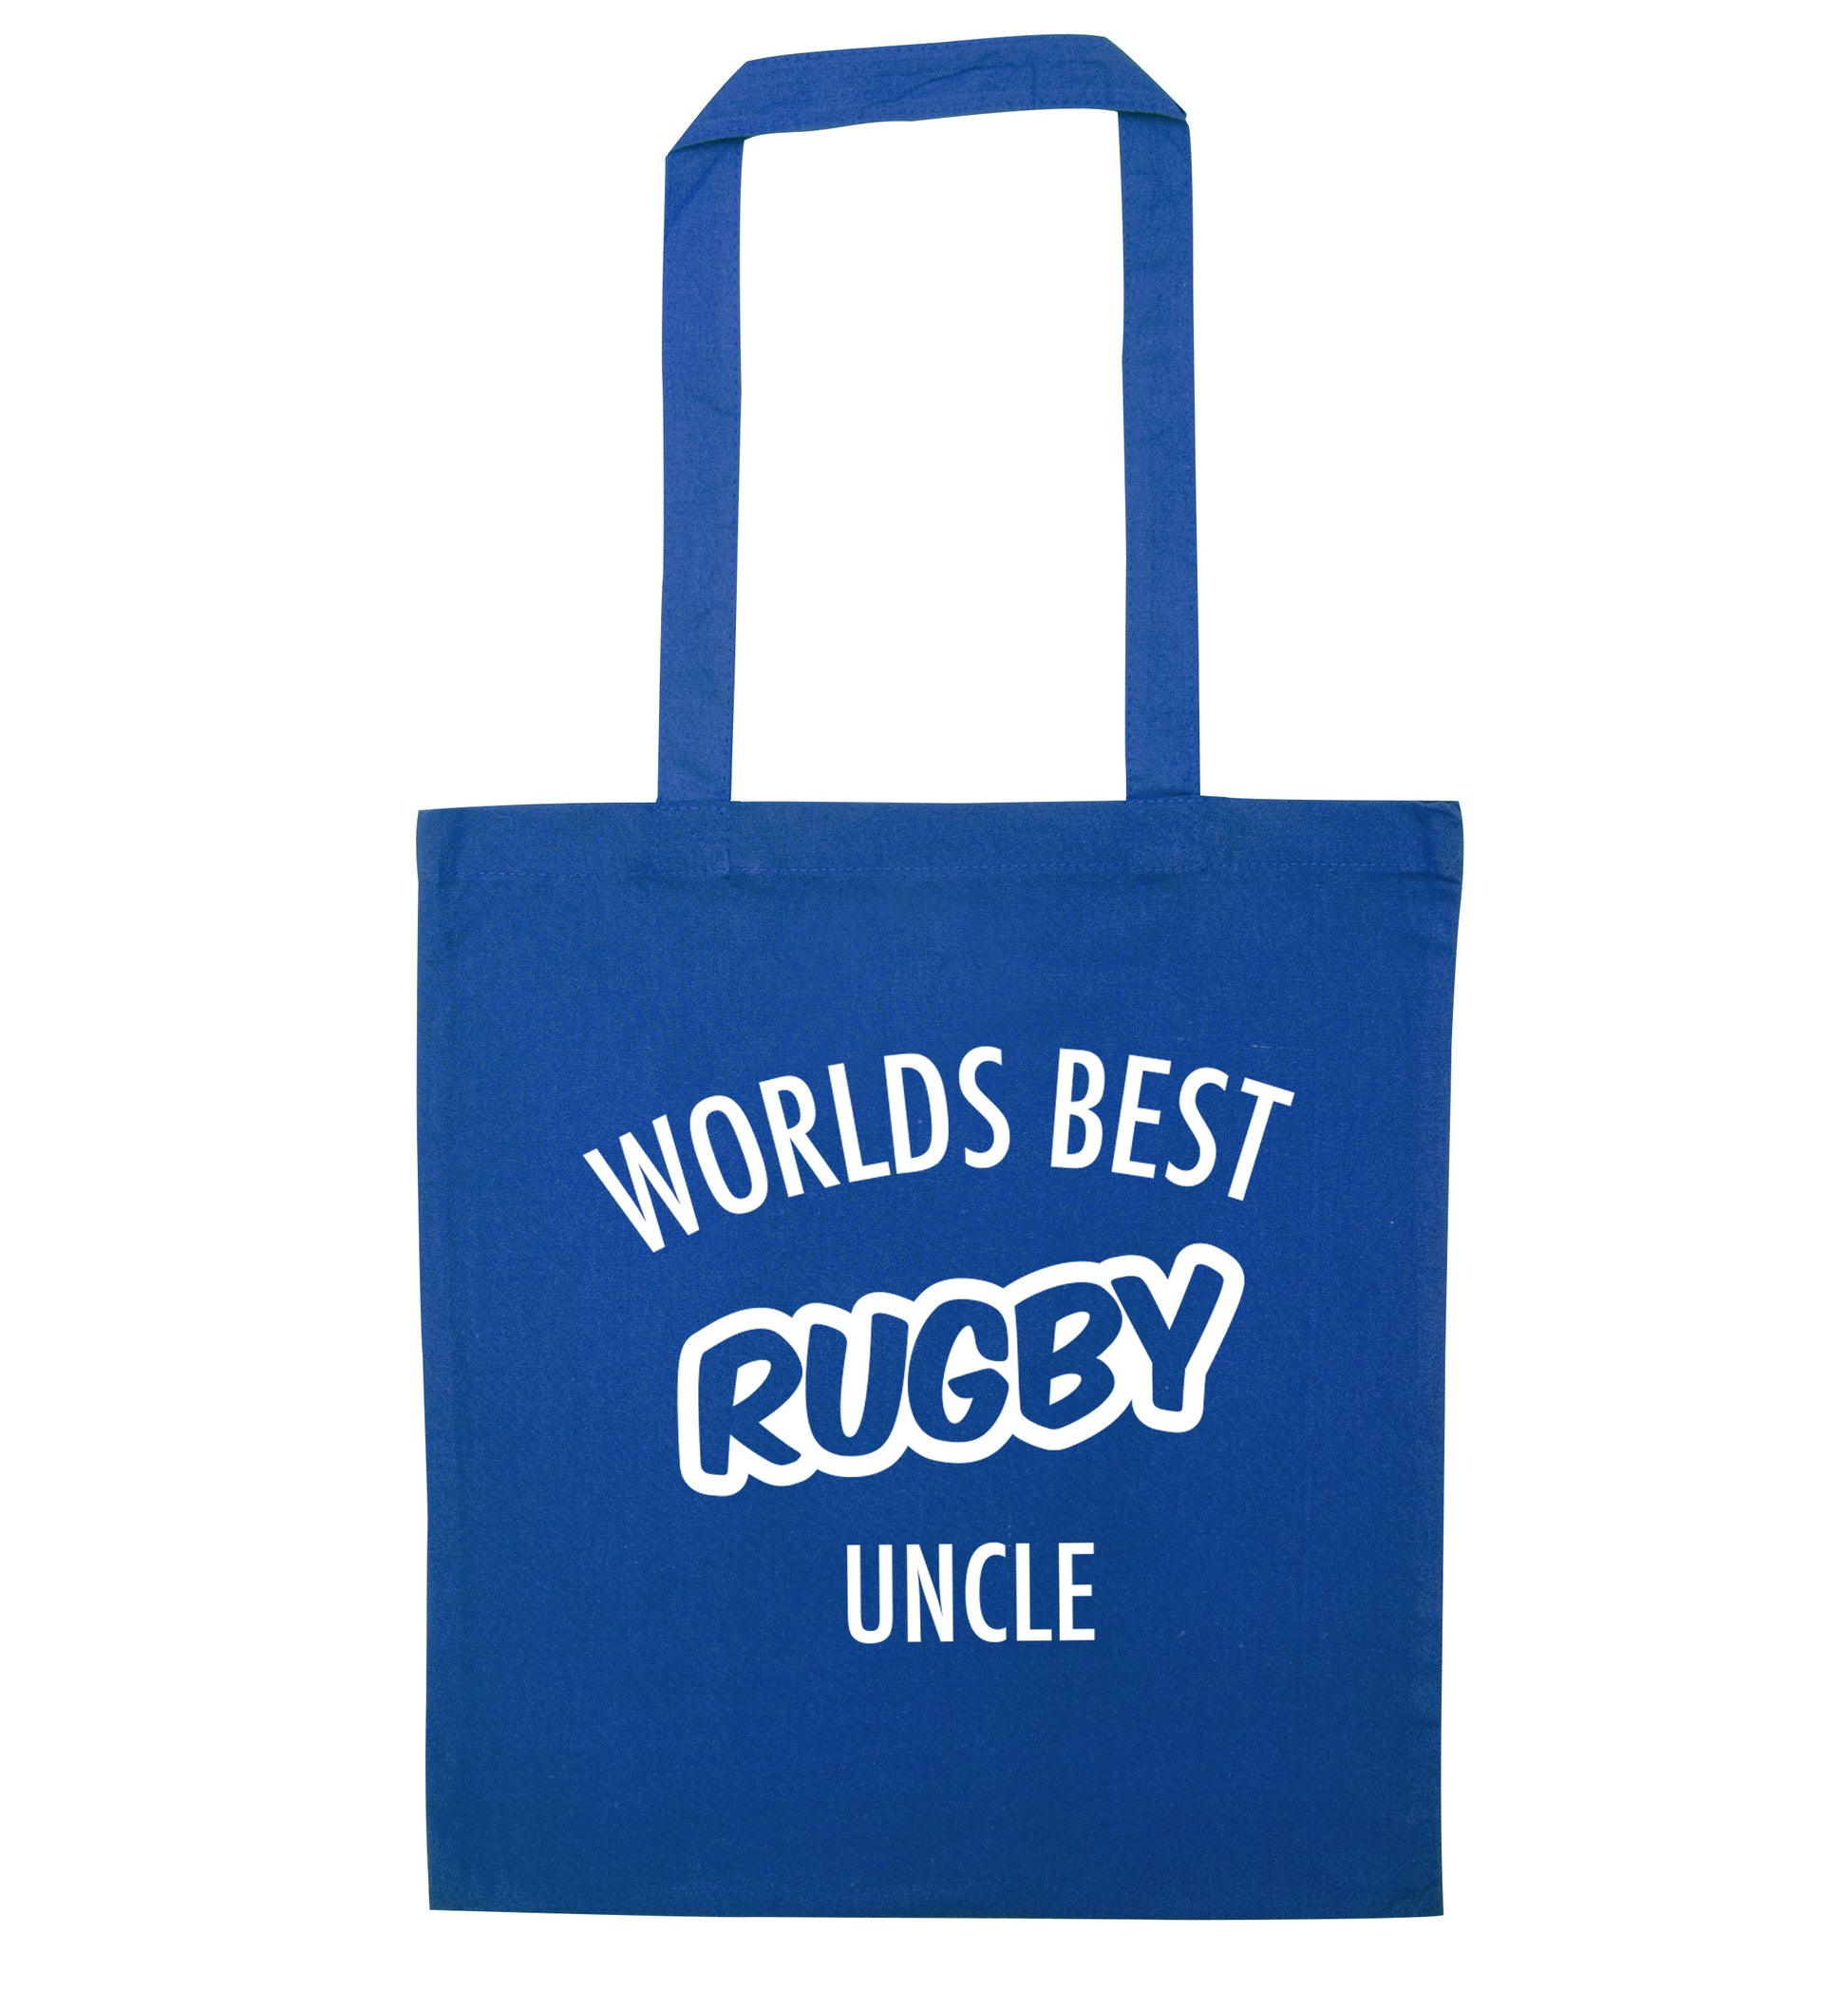 Worlds best rugby uncle blue tote bag